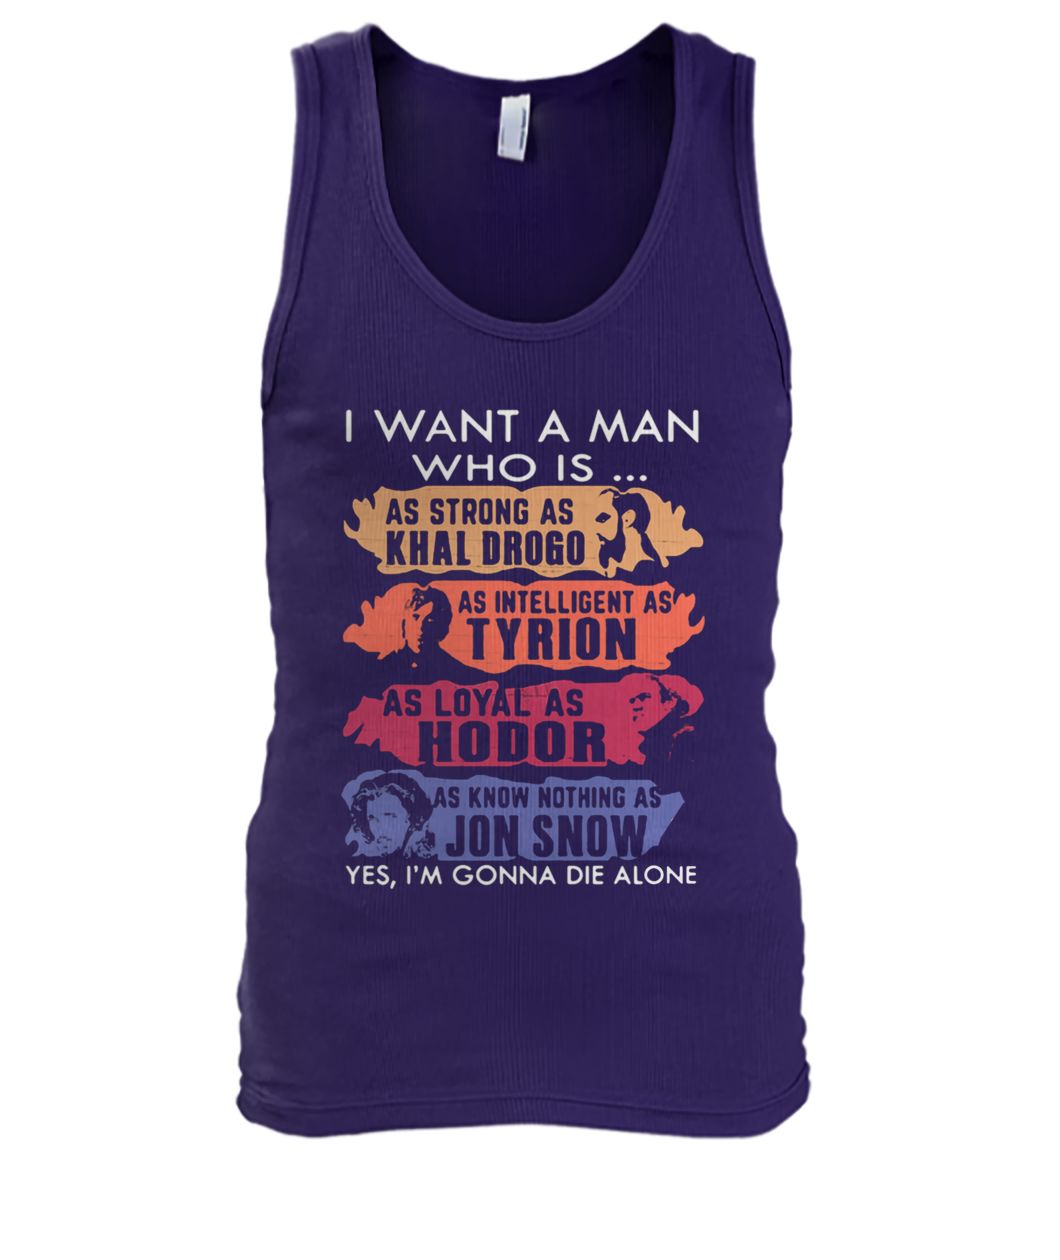 I want a man who is as handsome as jon snow as strong as khal drogo game of thrones men's tank top